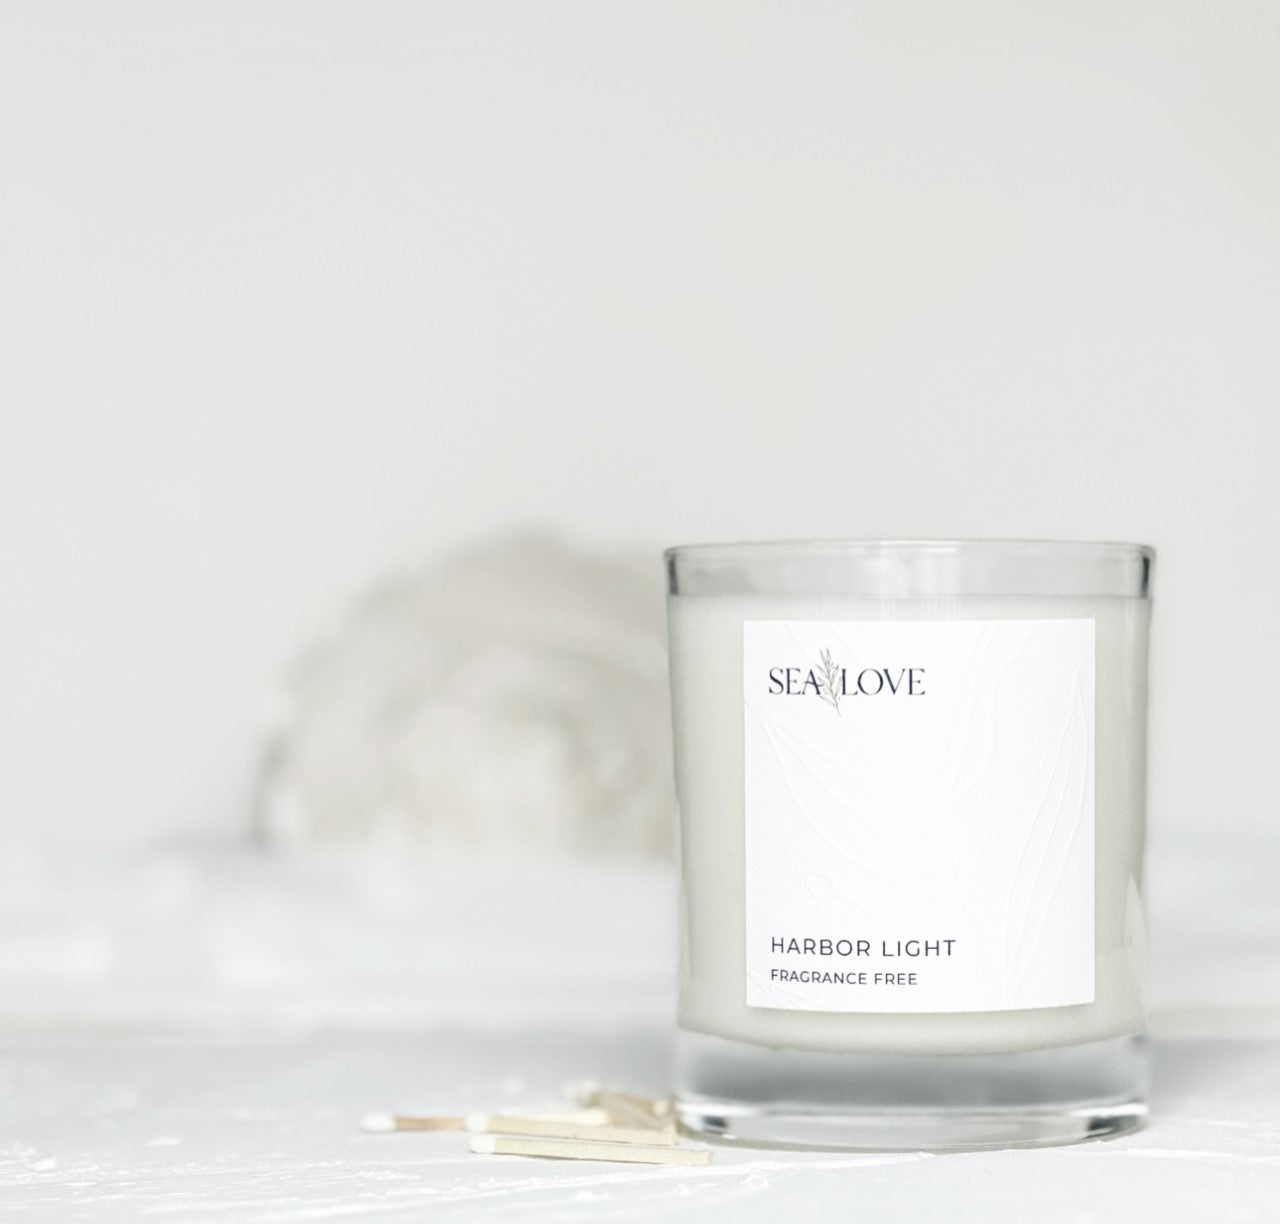 HARBOR LIGHT SOY CANDLE - FRAGRANCE FREE